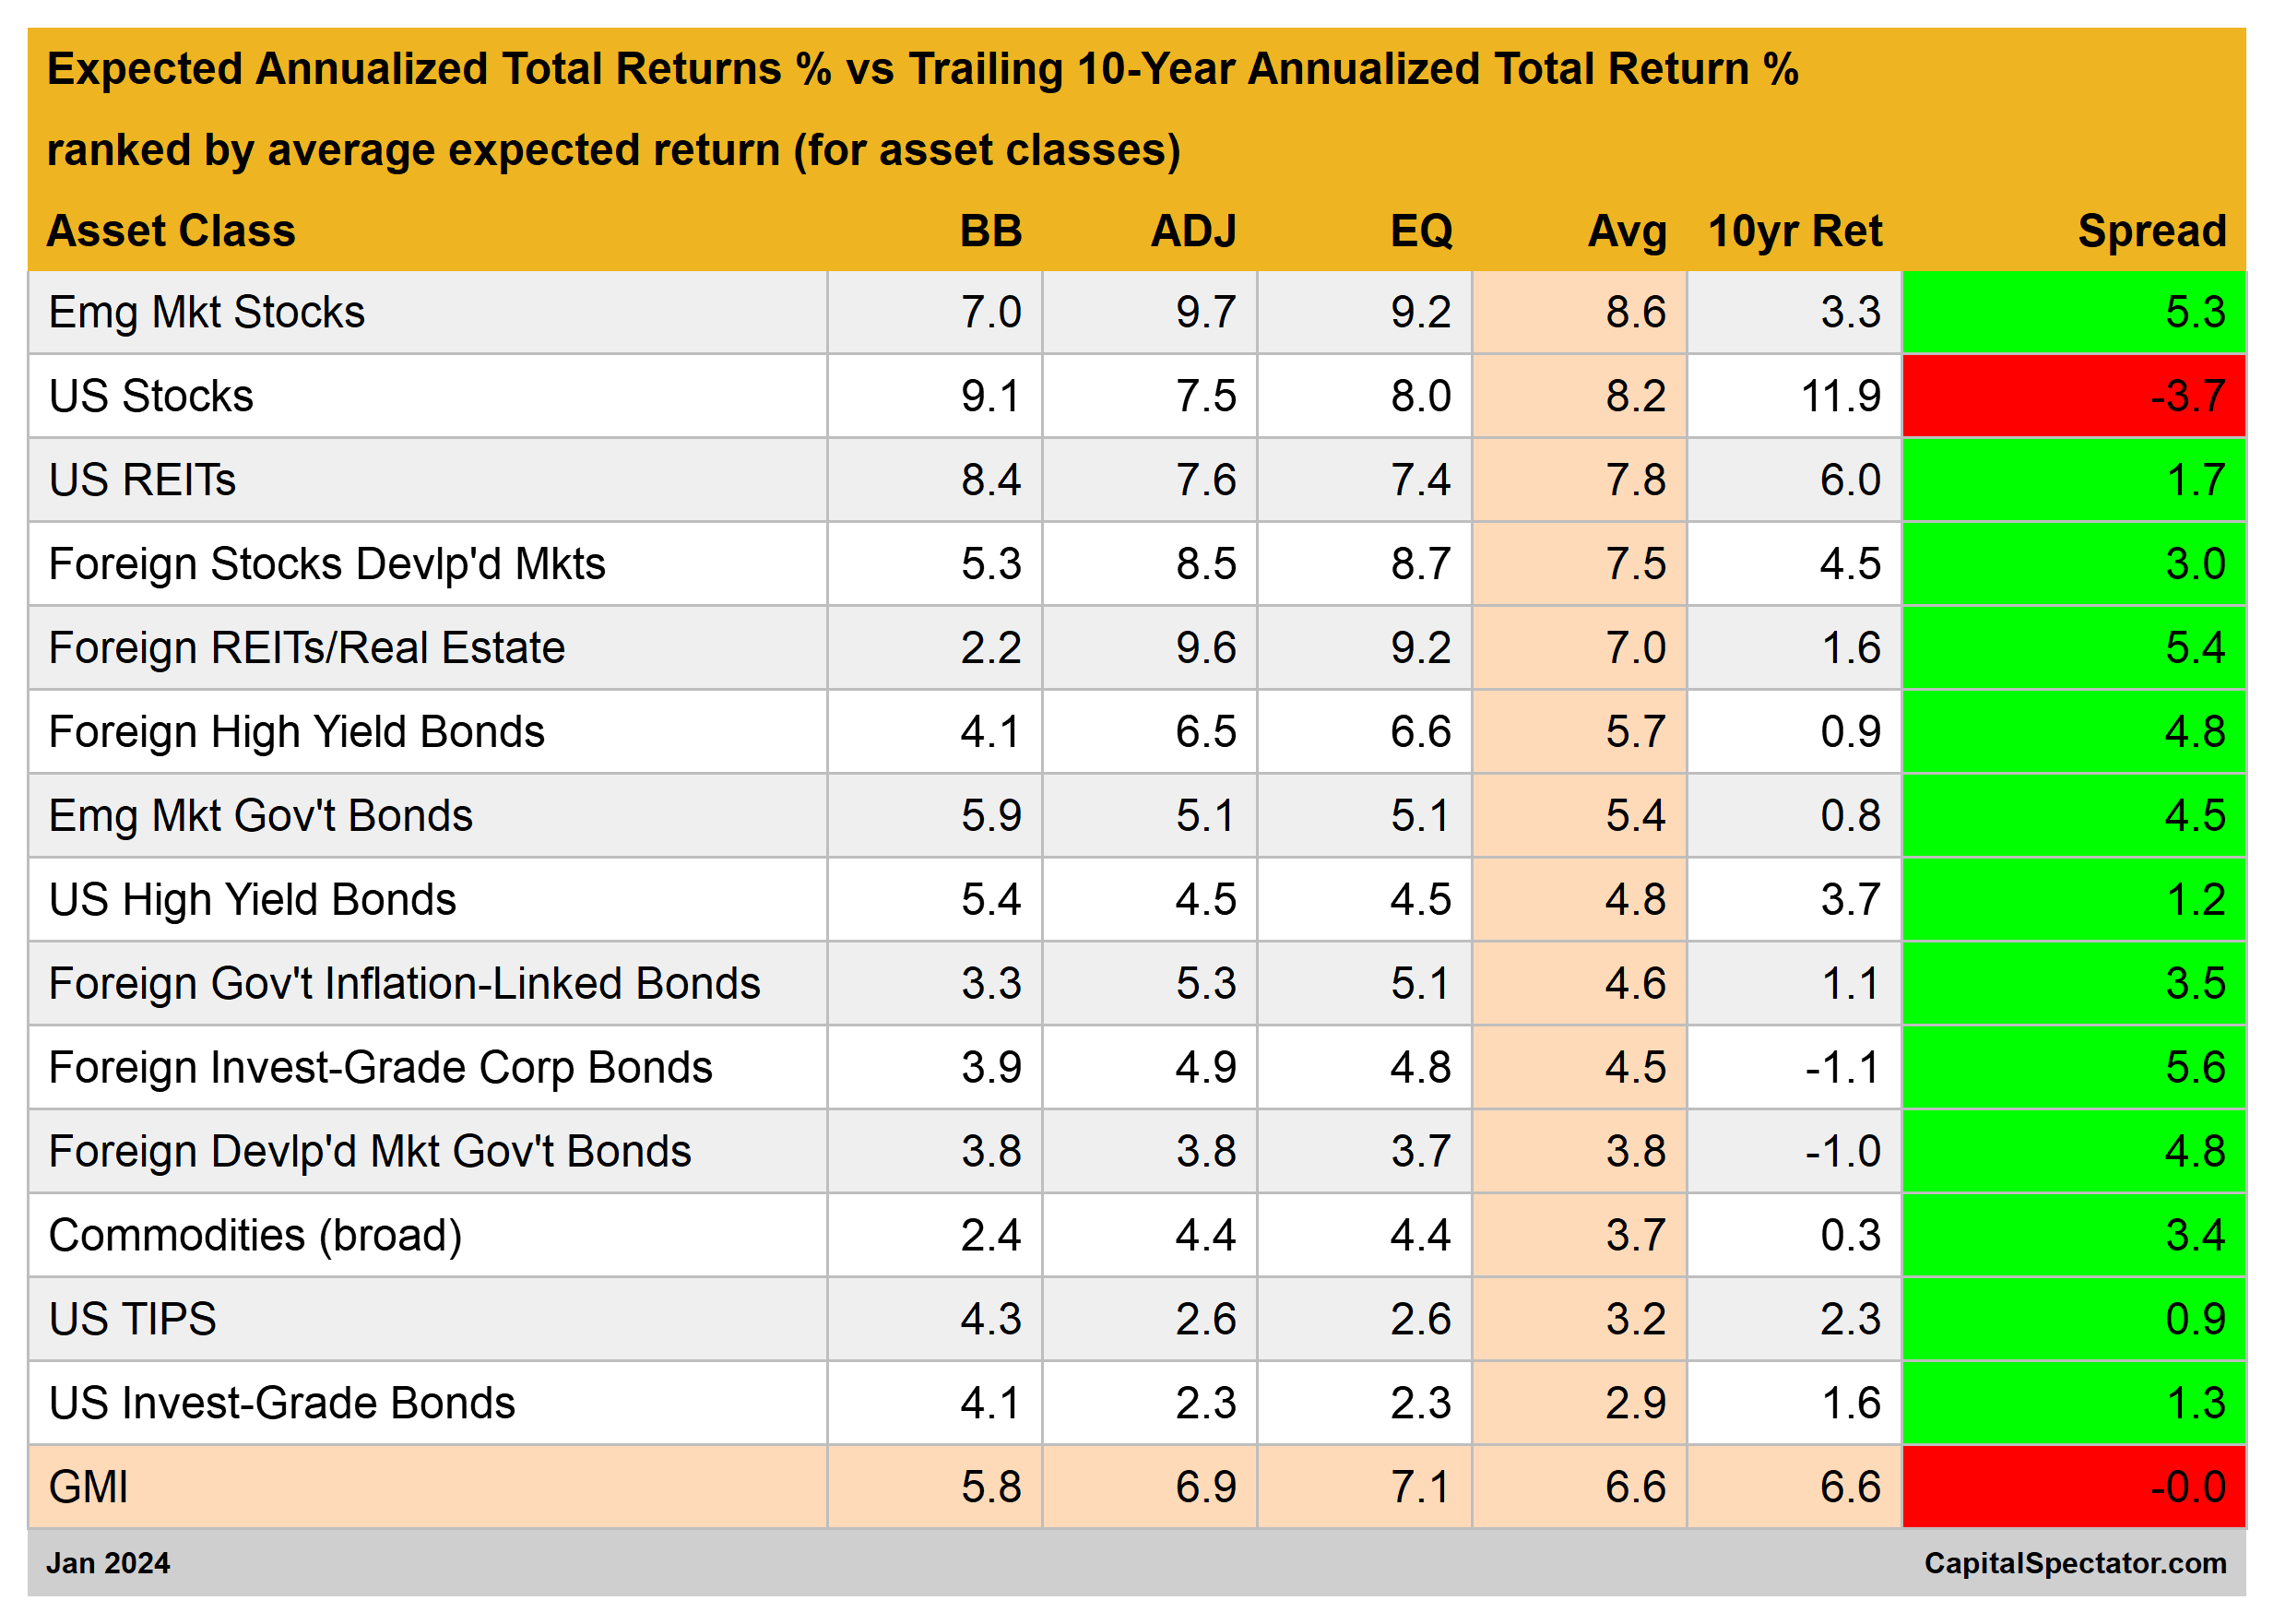 Expected Annualized Returns